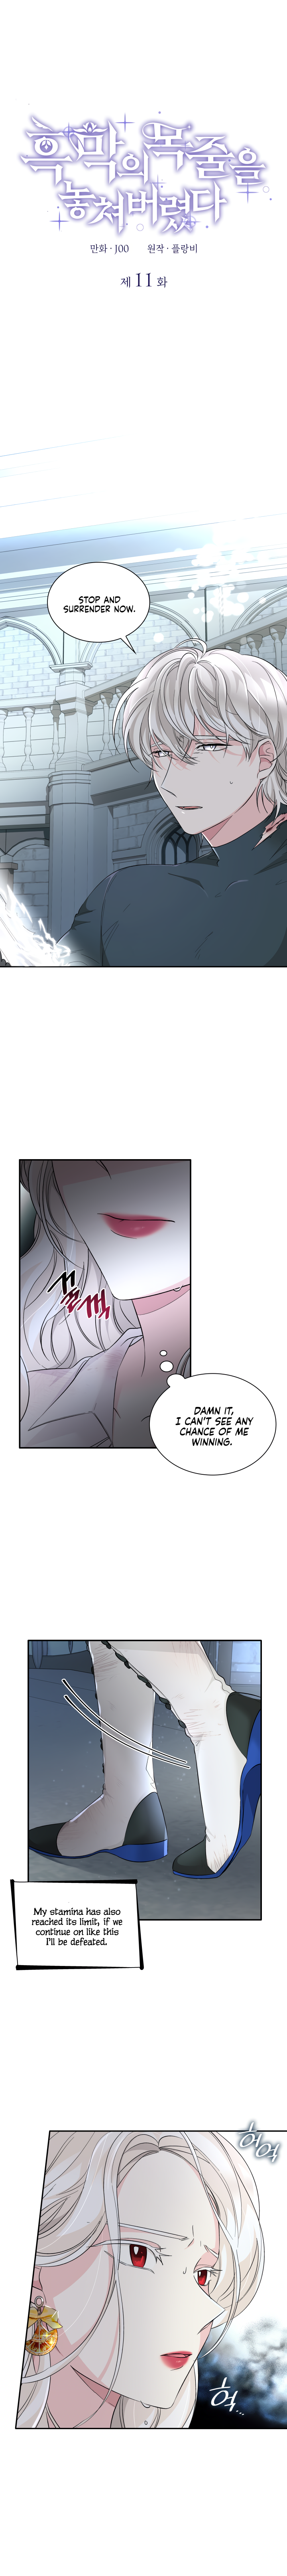 I Lost The Leash Of The Yandere Male Lead - 11 page 1